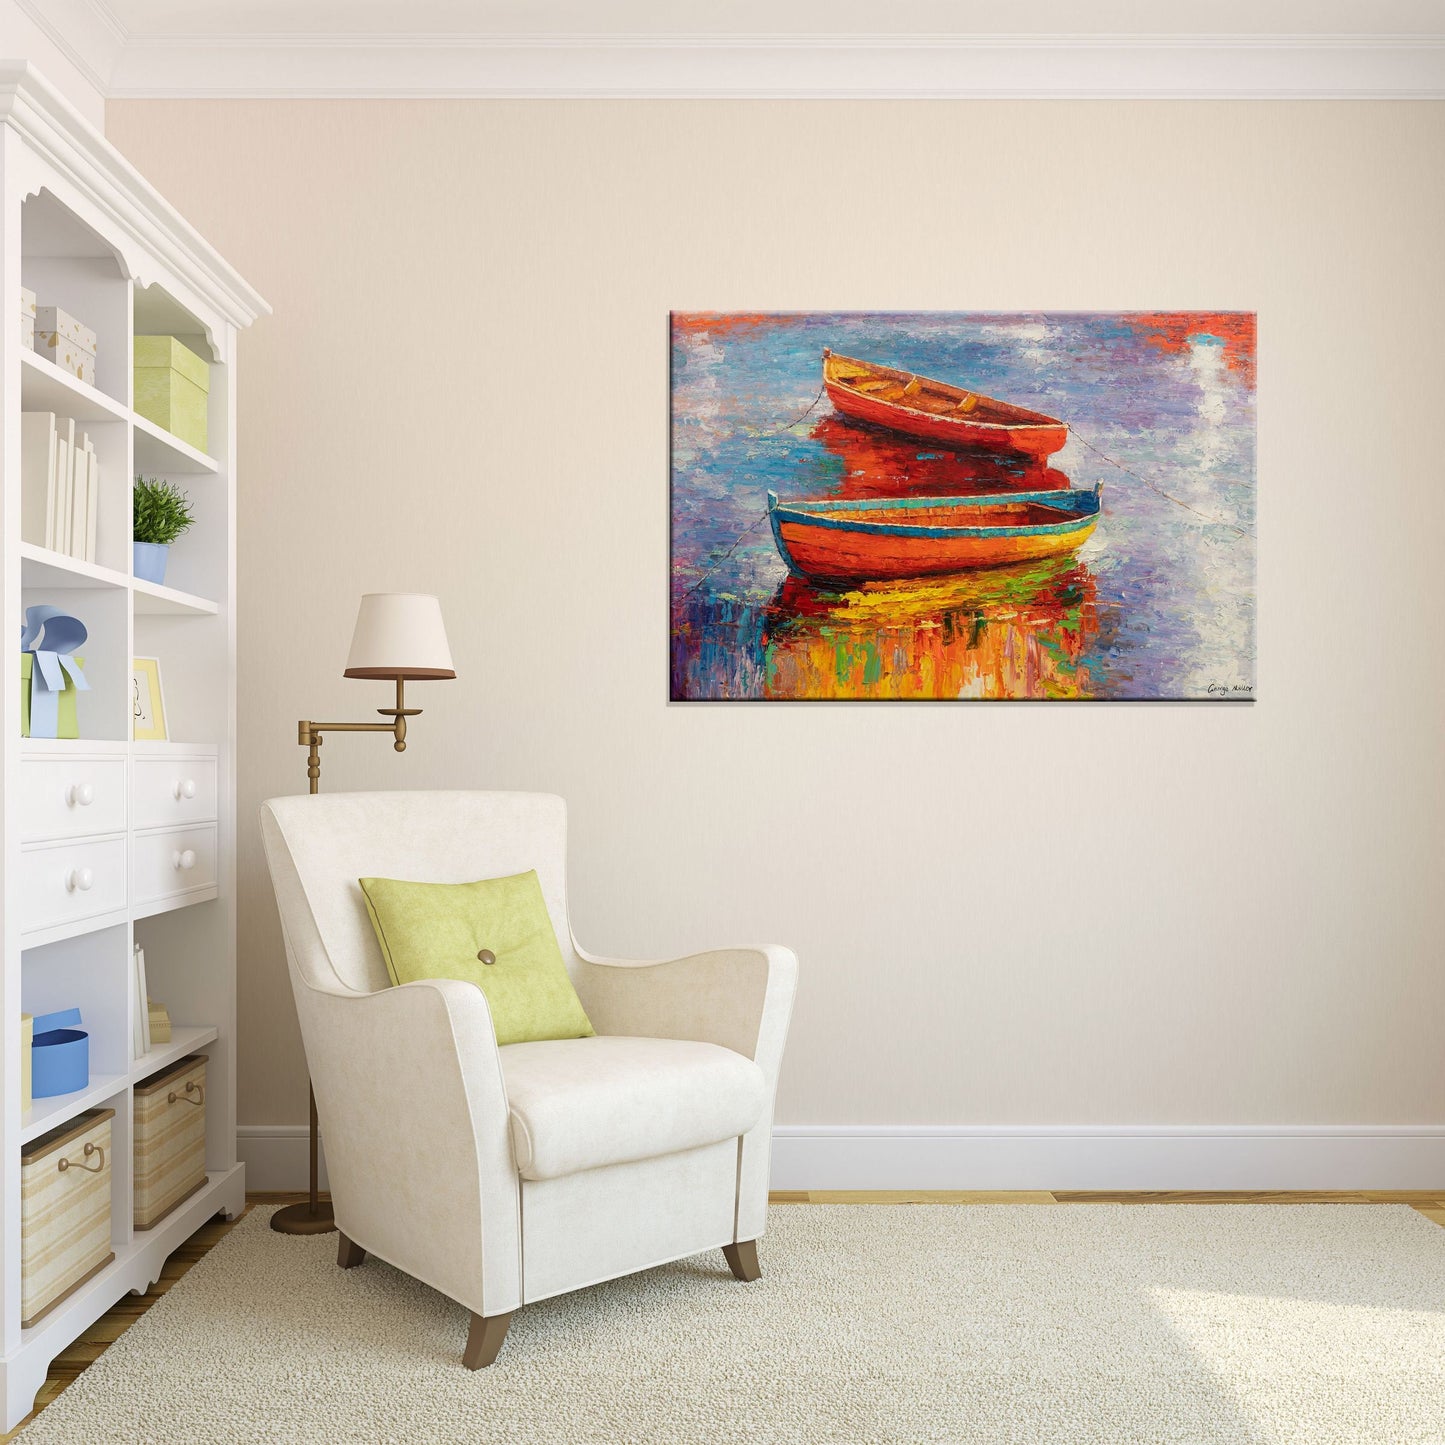 Oil Painting Seascape, Landscape Painting, Large Canvas Art, Canvas Painting, Original Artwork, Abstract Oil Painting, Living Room Decor